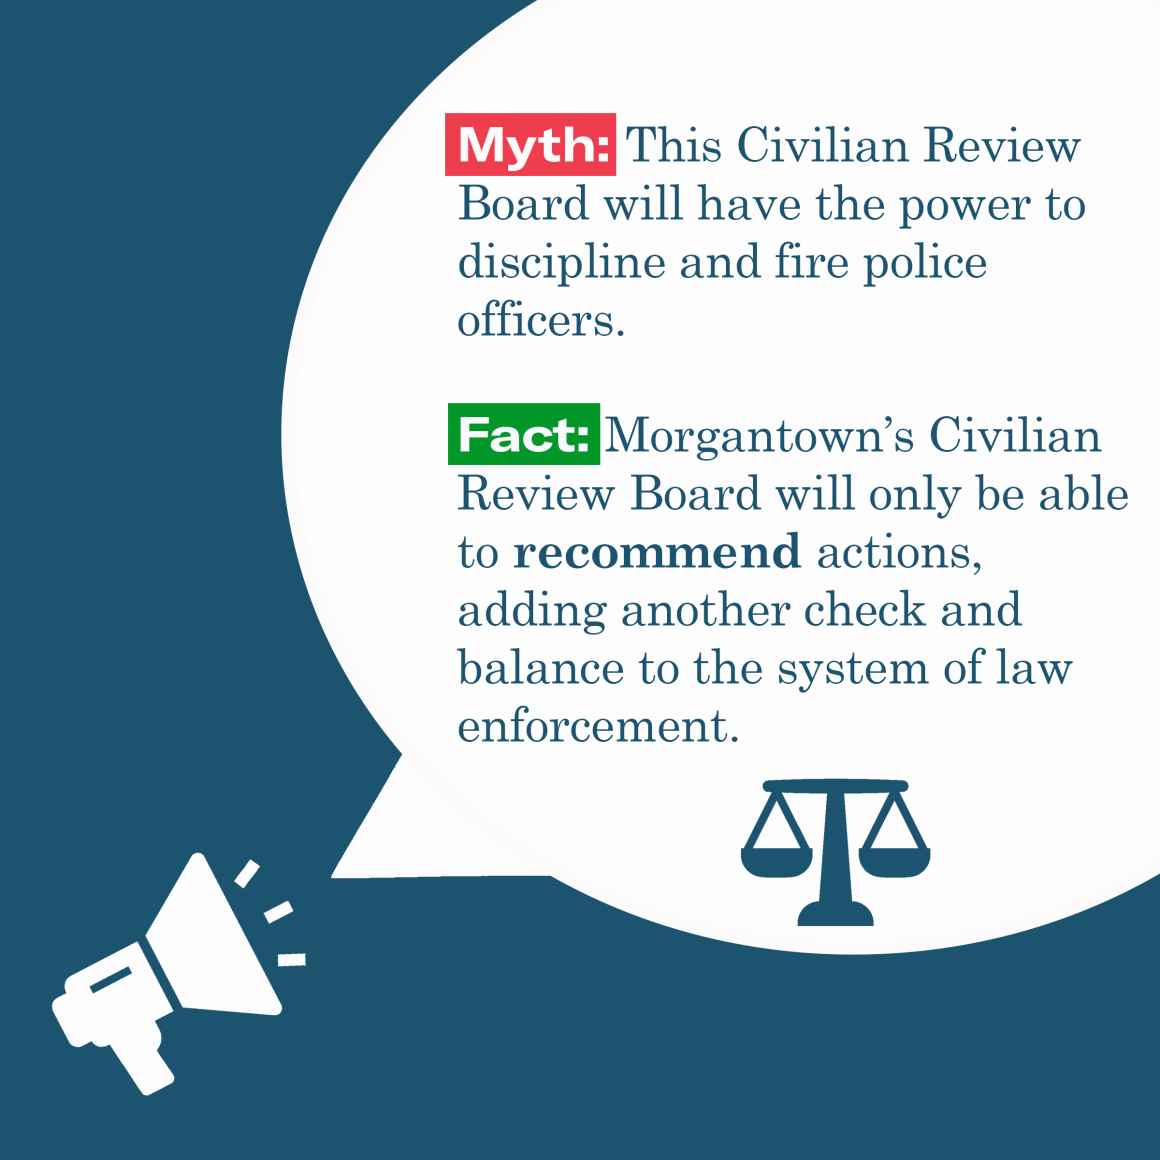 Myth: The review board will have the power to discipline an dfire police. Fact: The review board will onle be able to make recommendations, adding another layer of checks and balances to law enforcement.